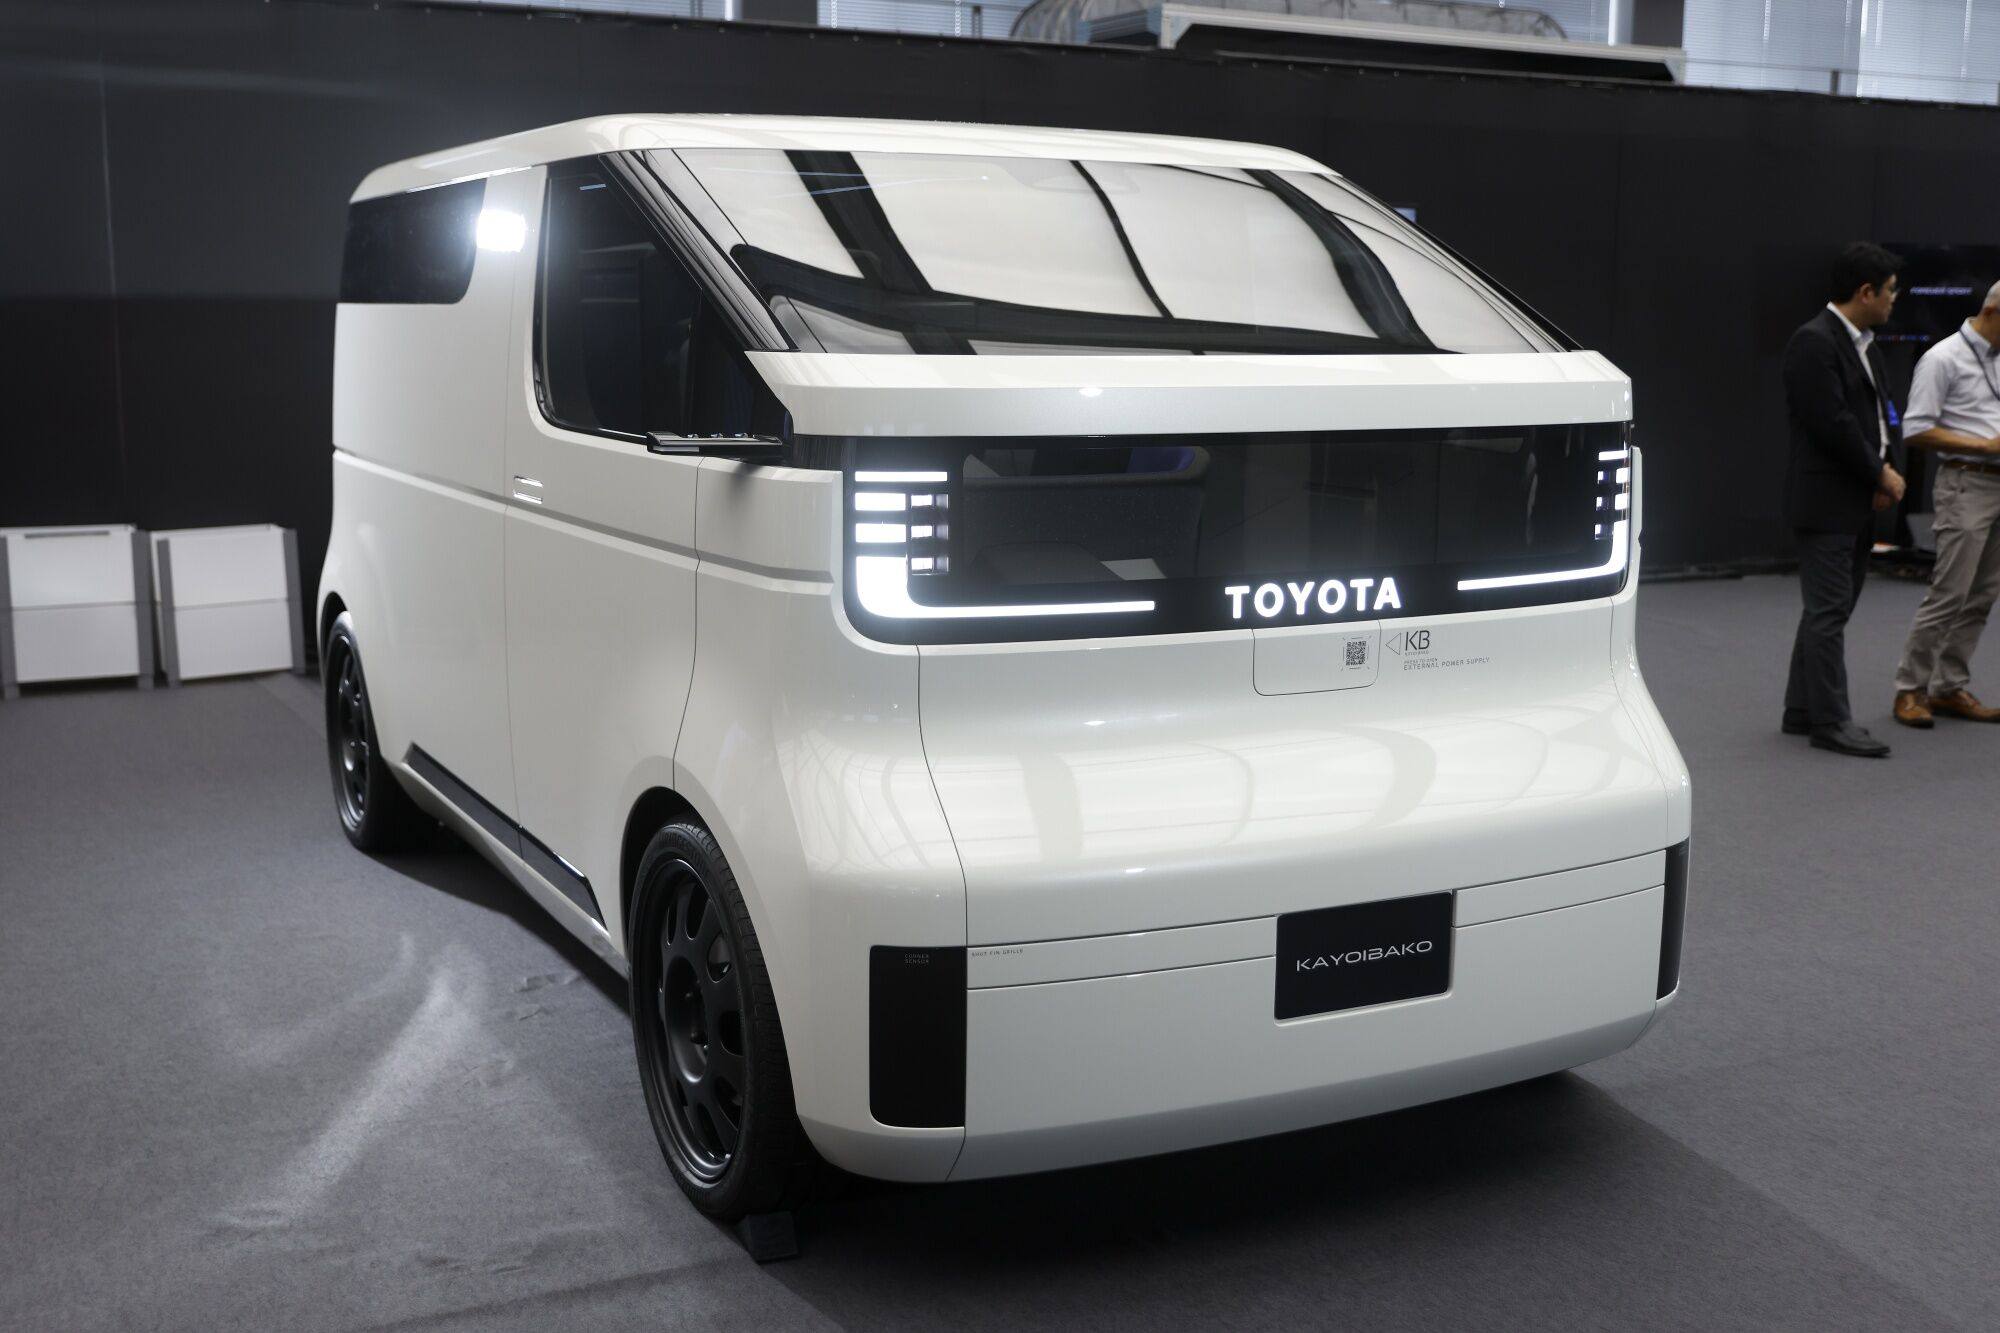 Toyota’s Kayoibako EV concept is seen at a media event ahead of the Japan Mobility Show in Hachioji, Tokyo. The show will run from October 26 to November 5. Photo: Bloomberg